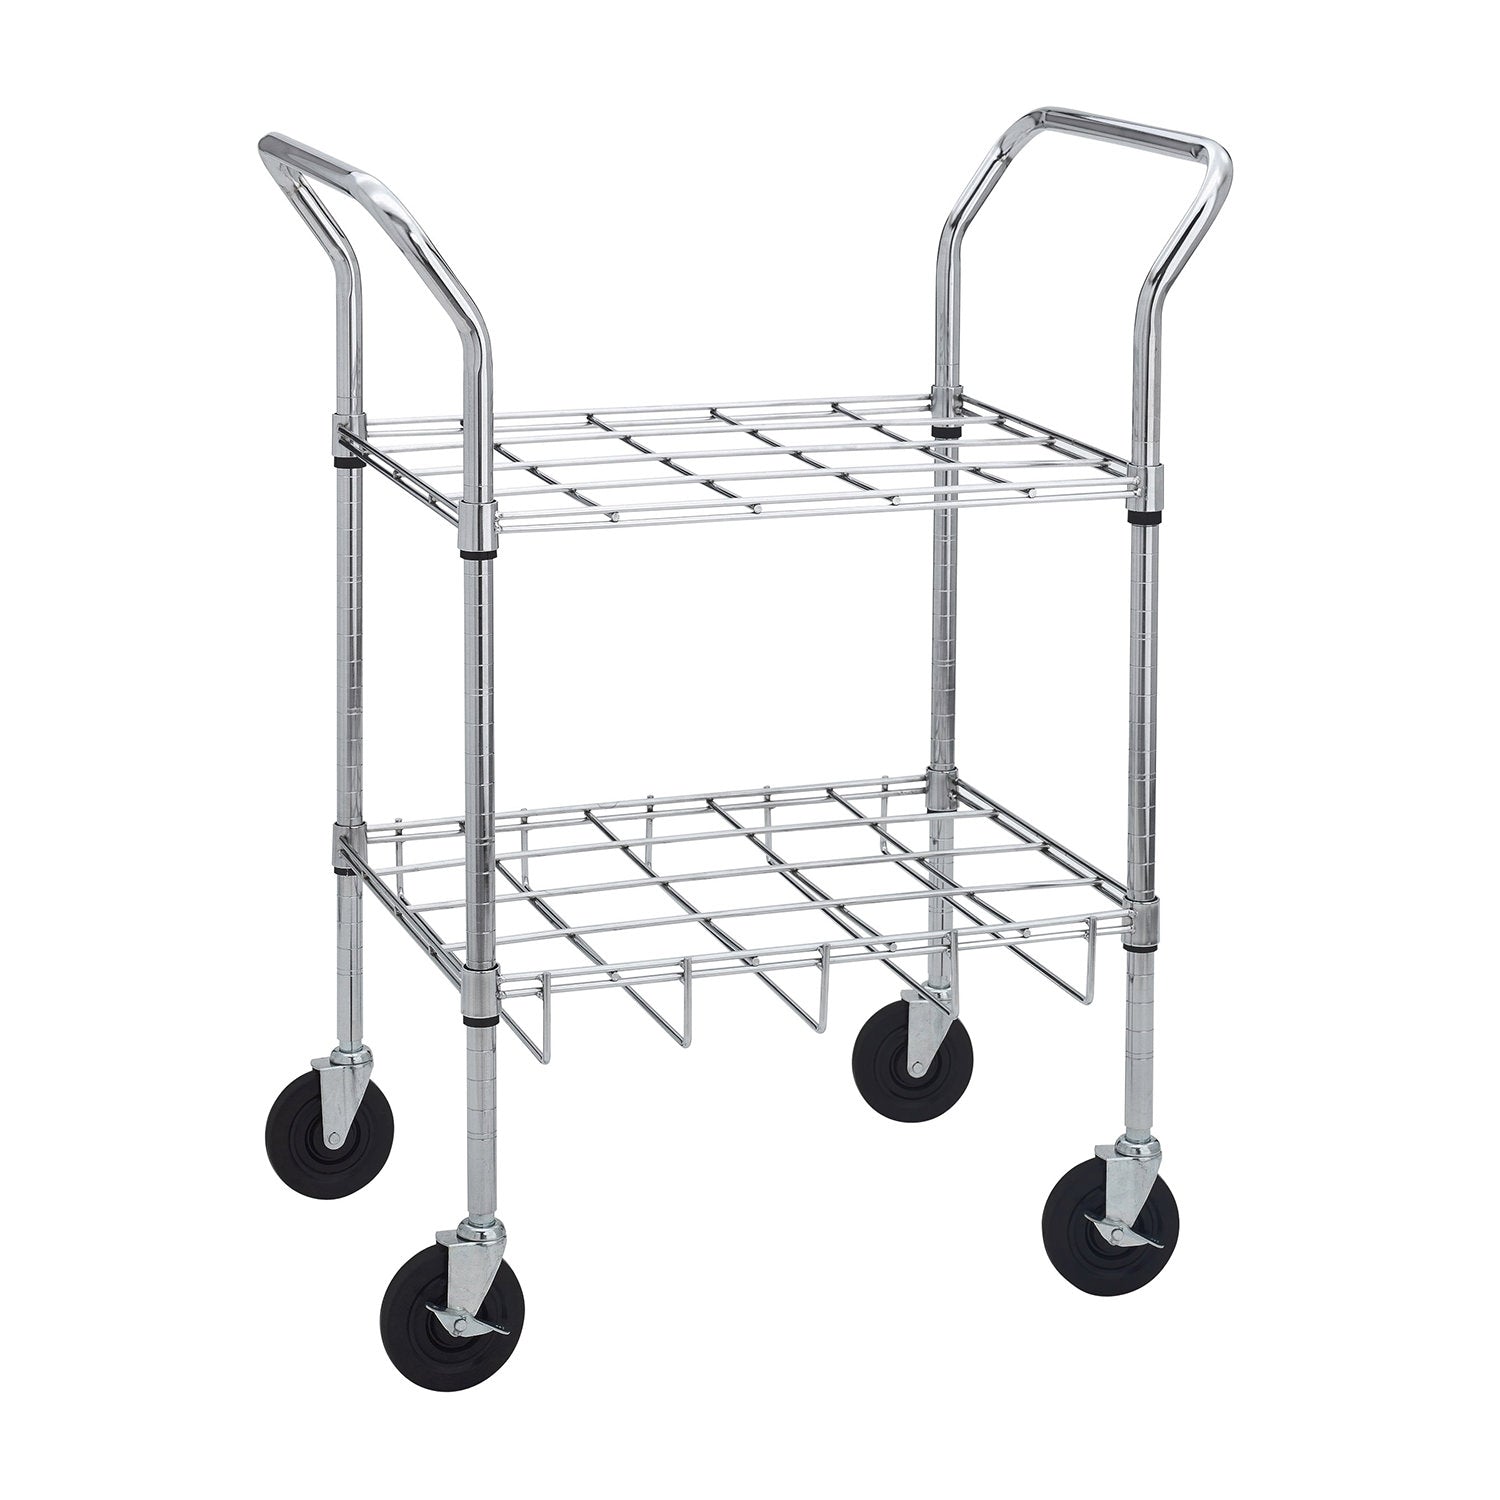 Oxygen Cylinder Cart-Fits 12 "E, D, C, or M9" Style Cylinders